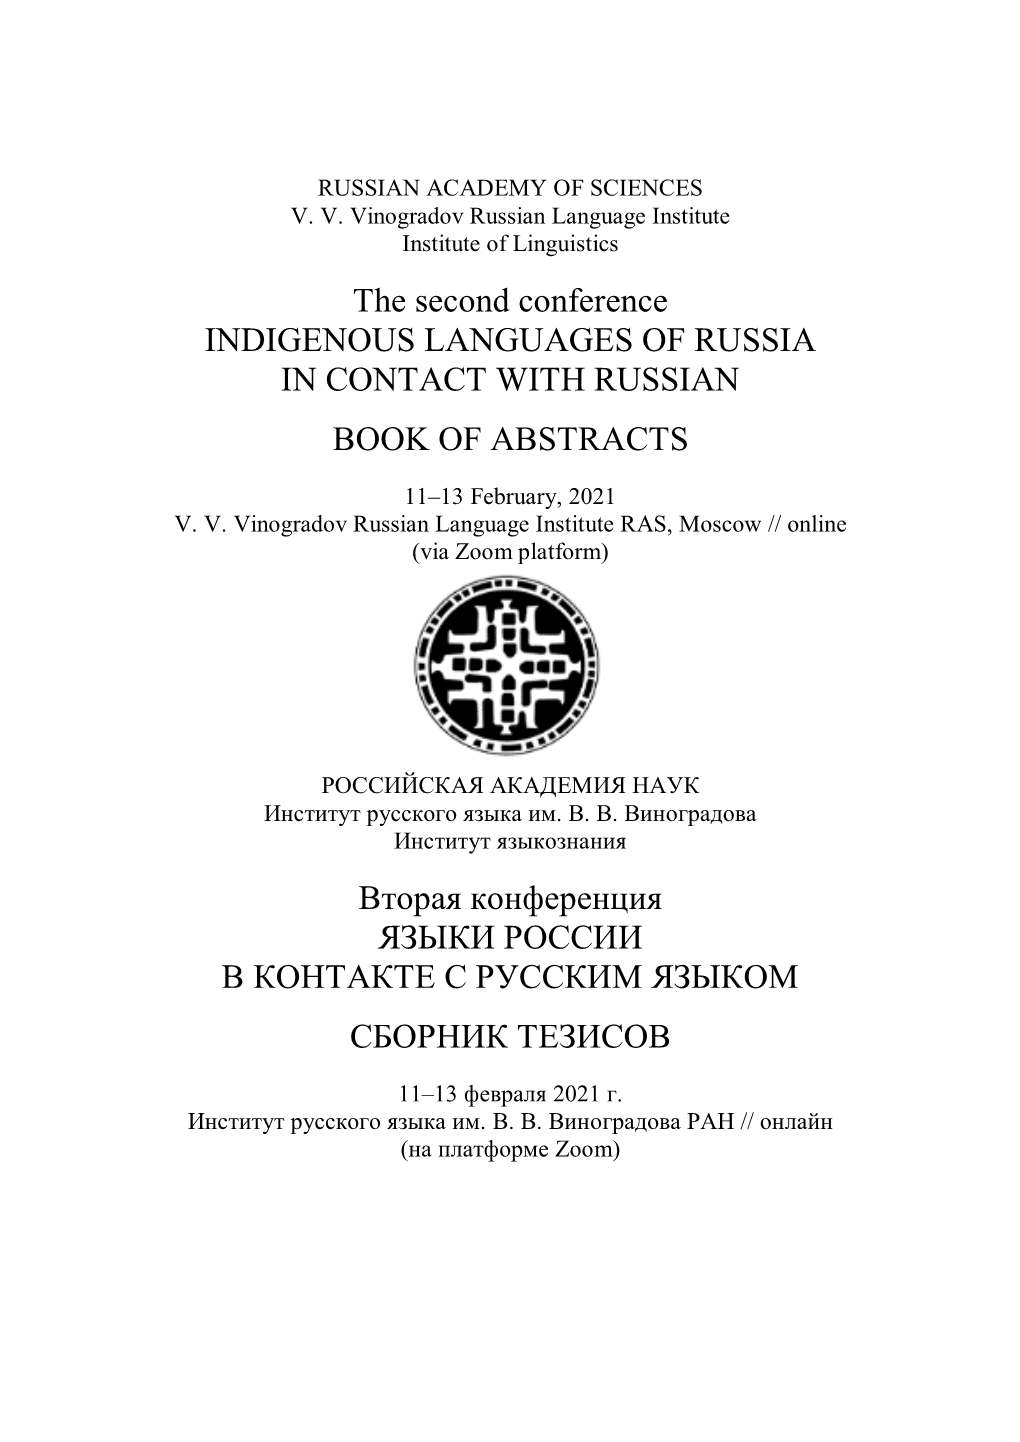 The Second Conference INDIGENOUS LANGUAGES of RUSSIA in CONTACT with RUSSIAN BOOK of ABSTRACTS